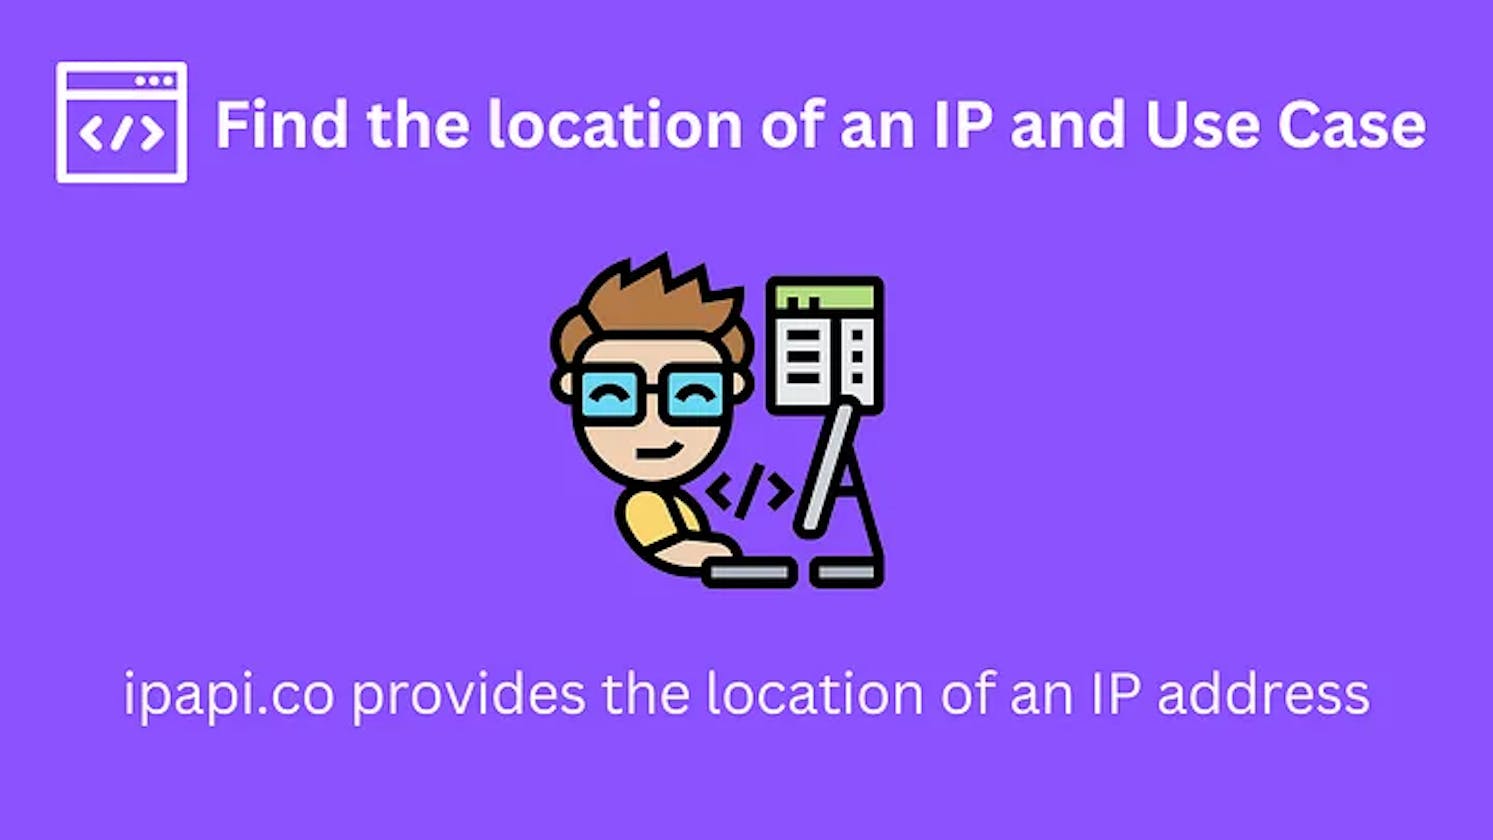 Find the location of an IP and Use Case